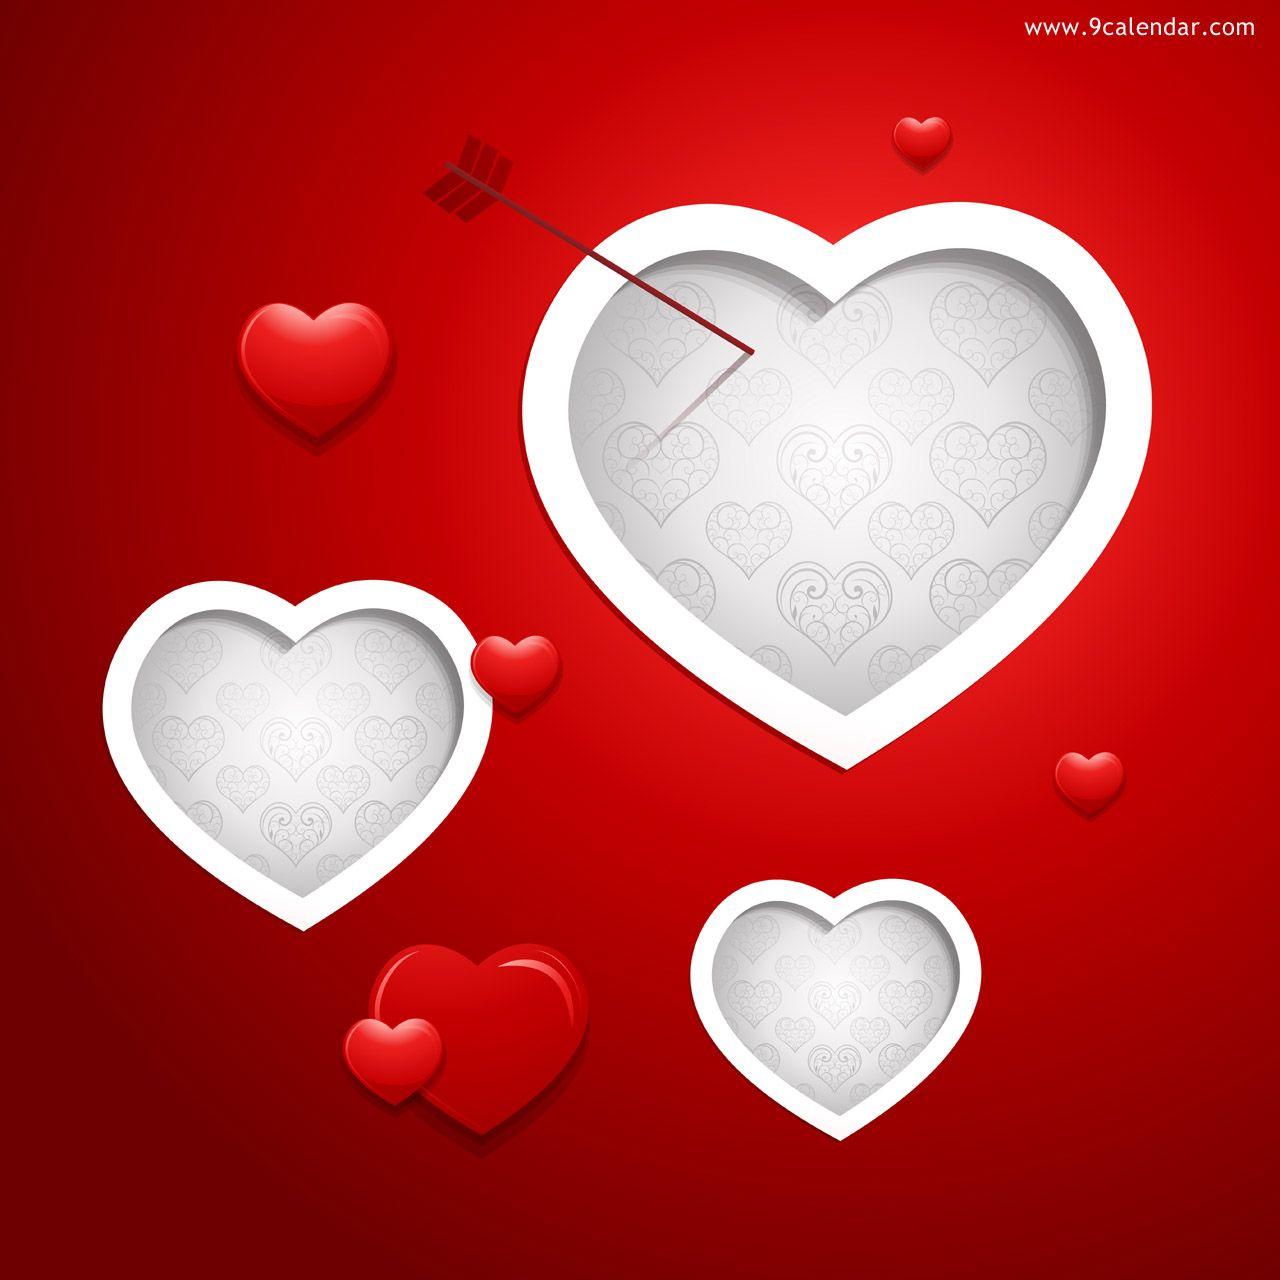 Valentines day card background & Wallpaper Feb 2013